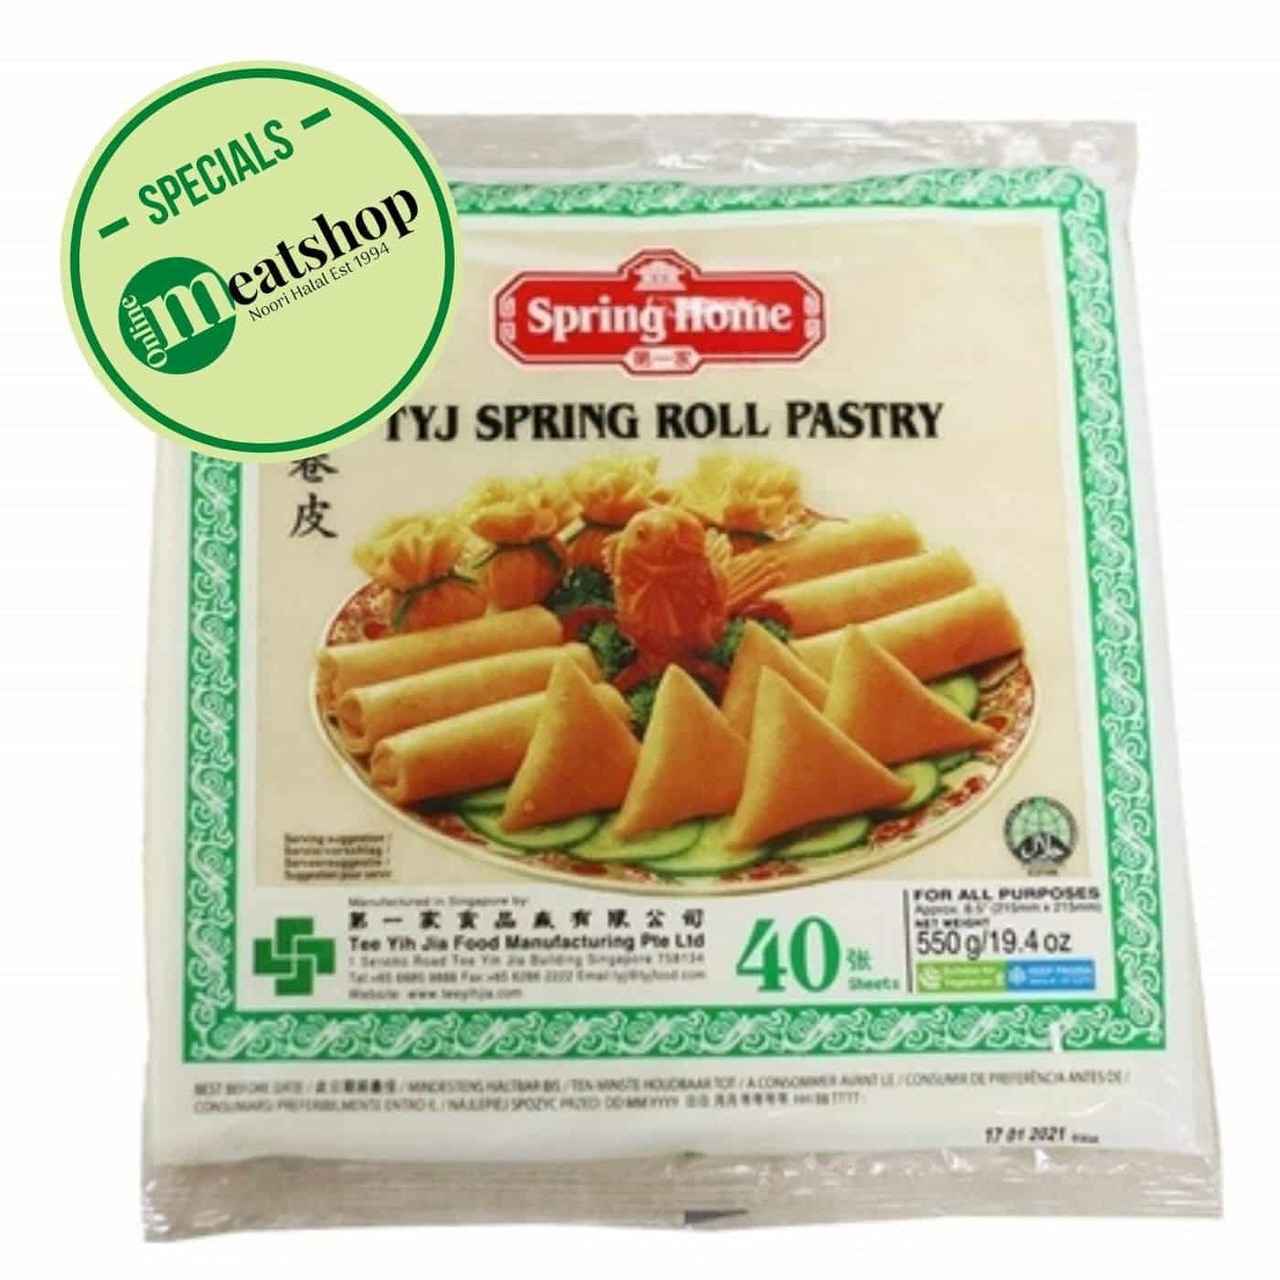 Manila Grocery Store - TYJ Spring Roll Pastry 40 sheets